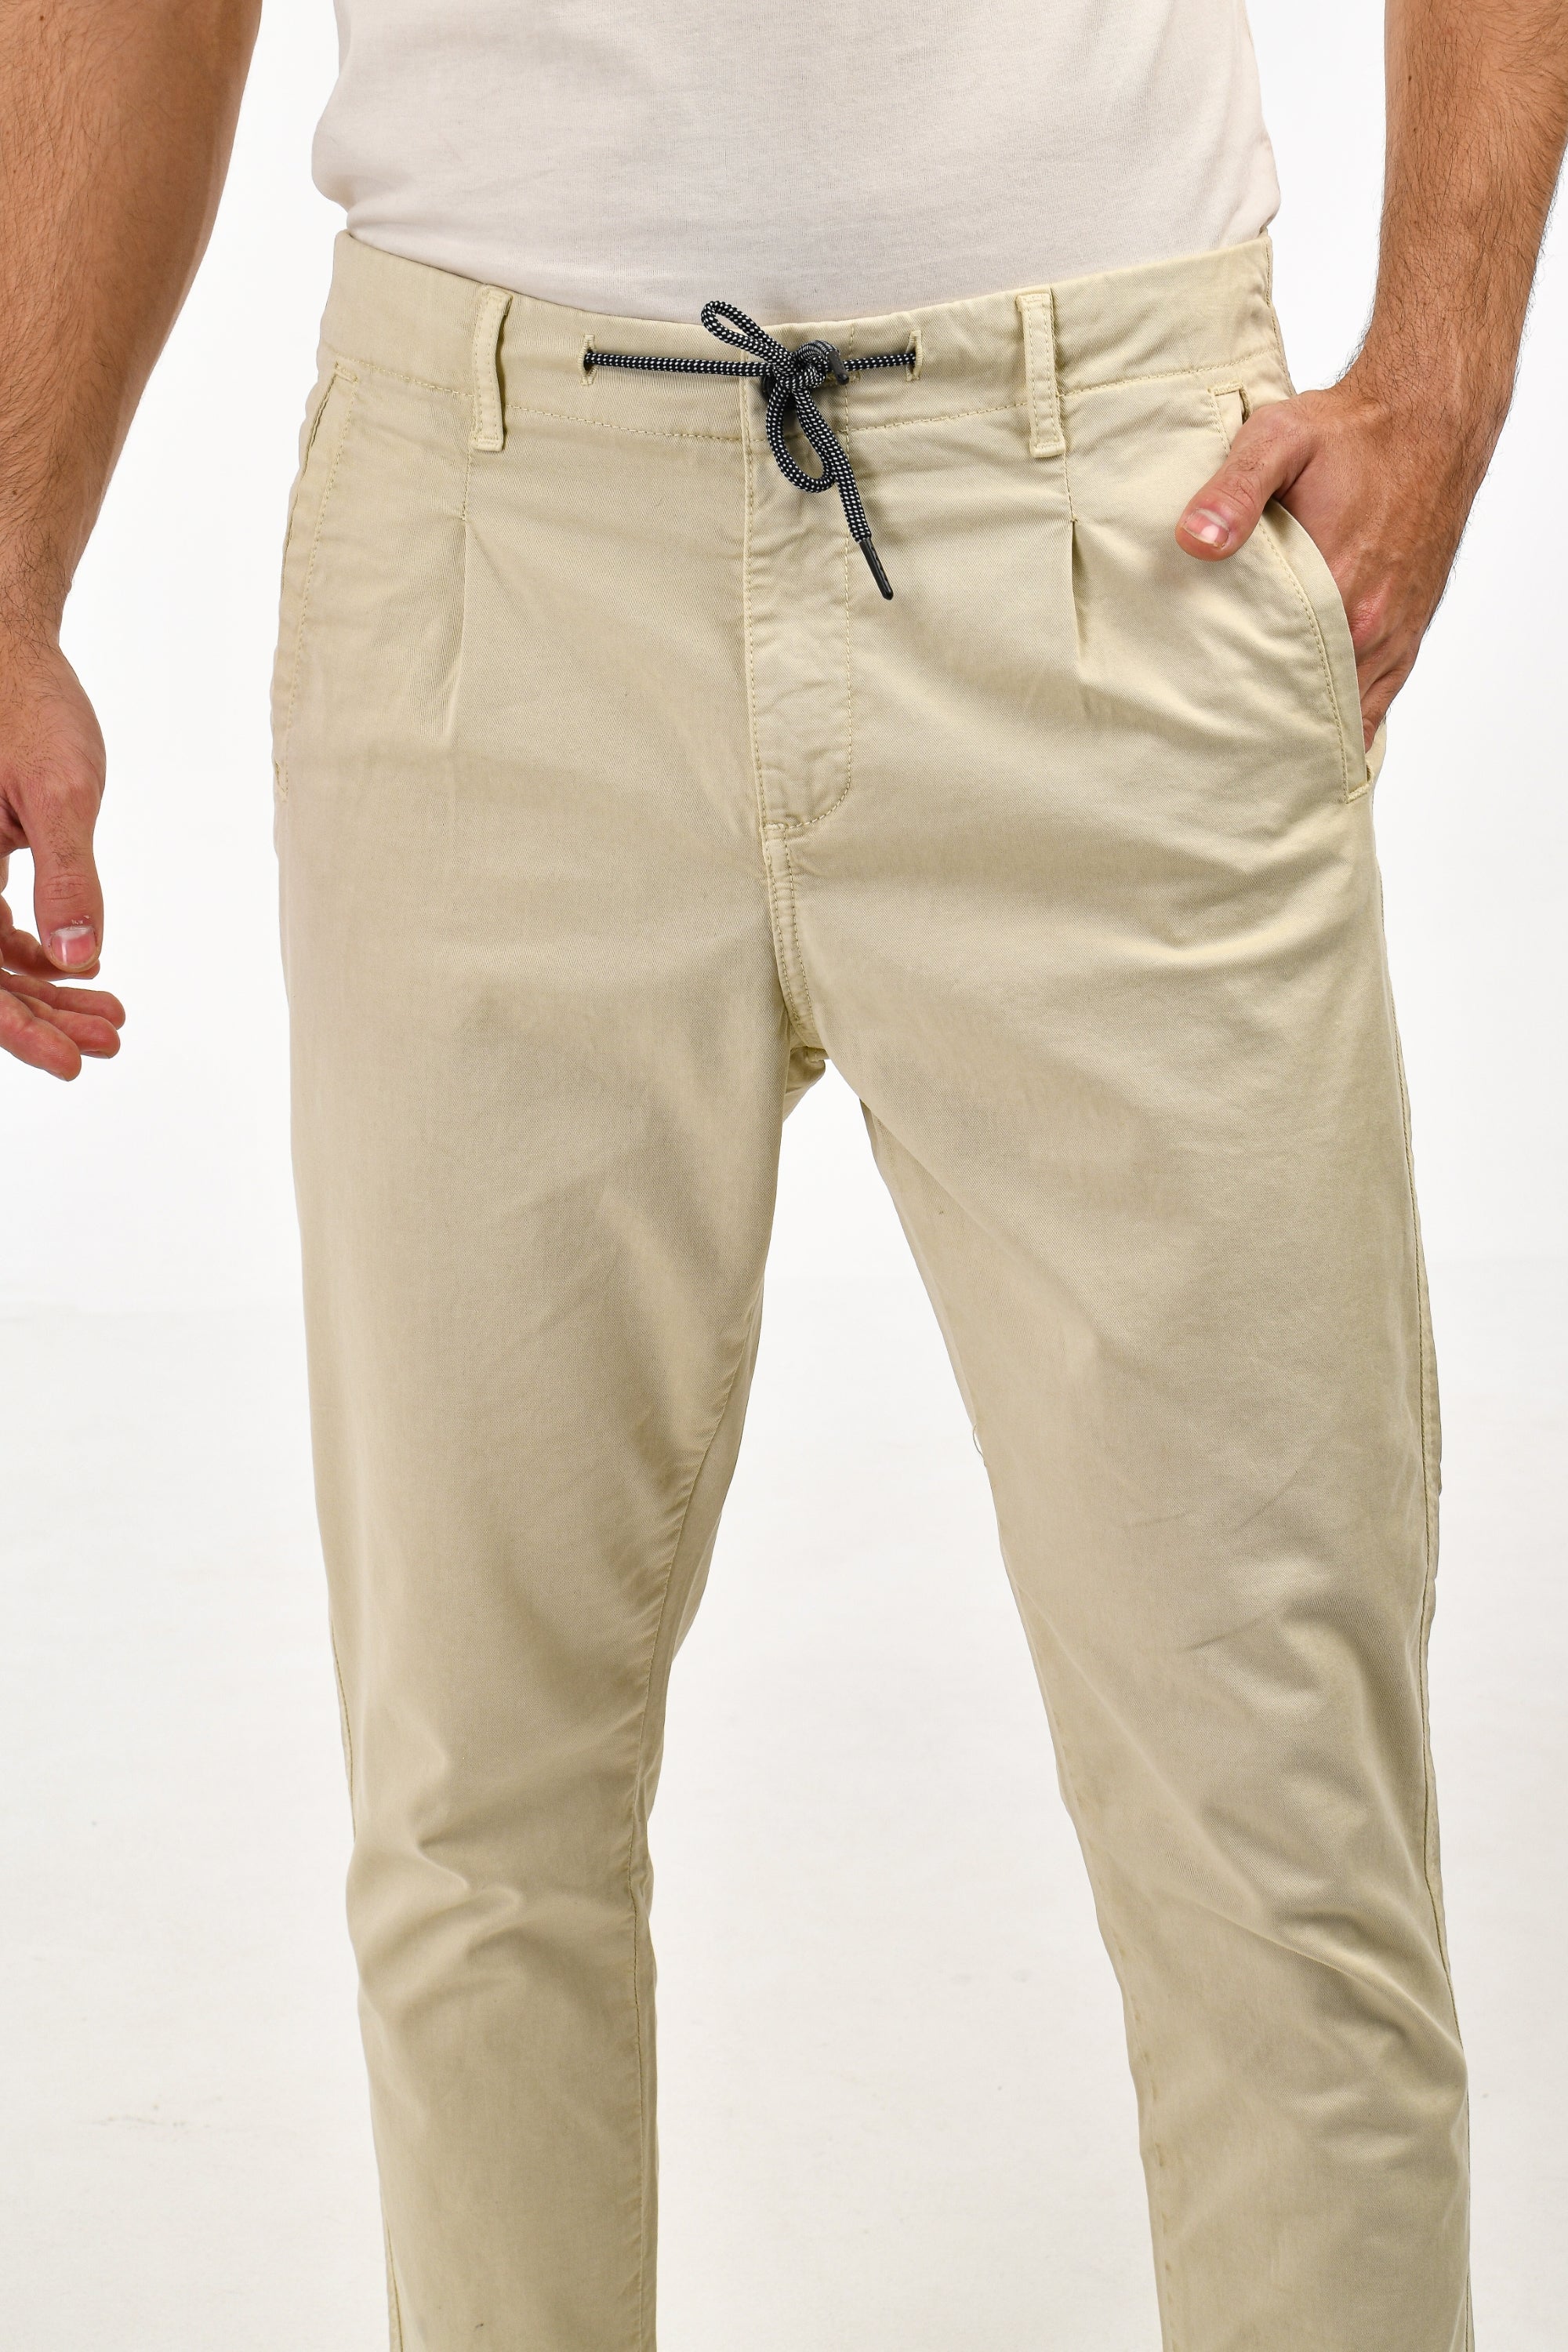 Cropped Fit Stone Chinos